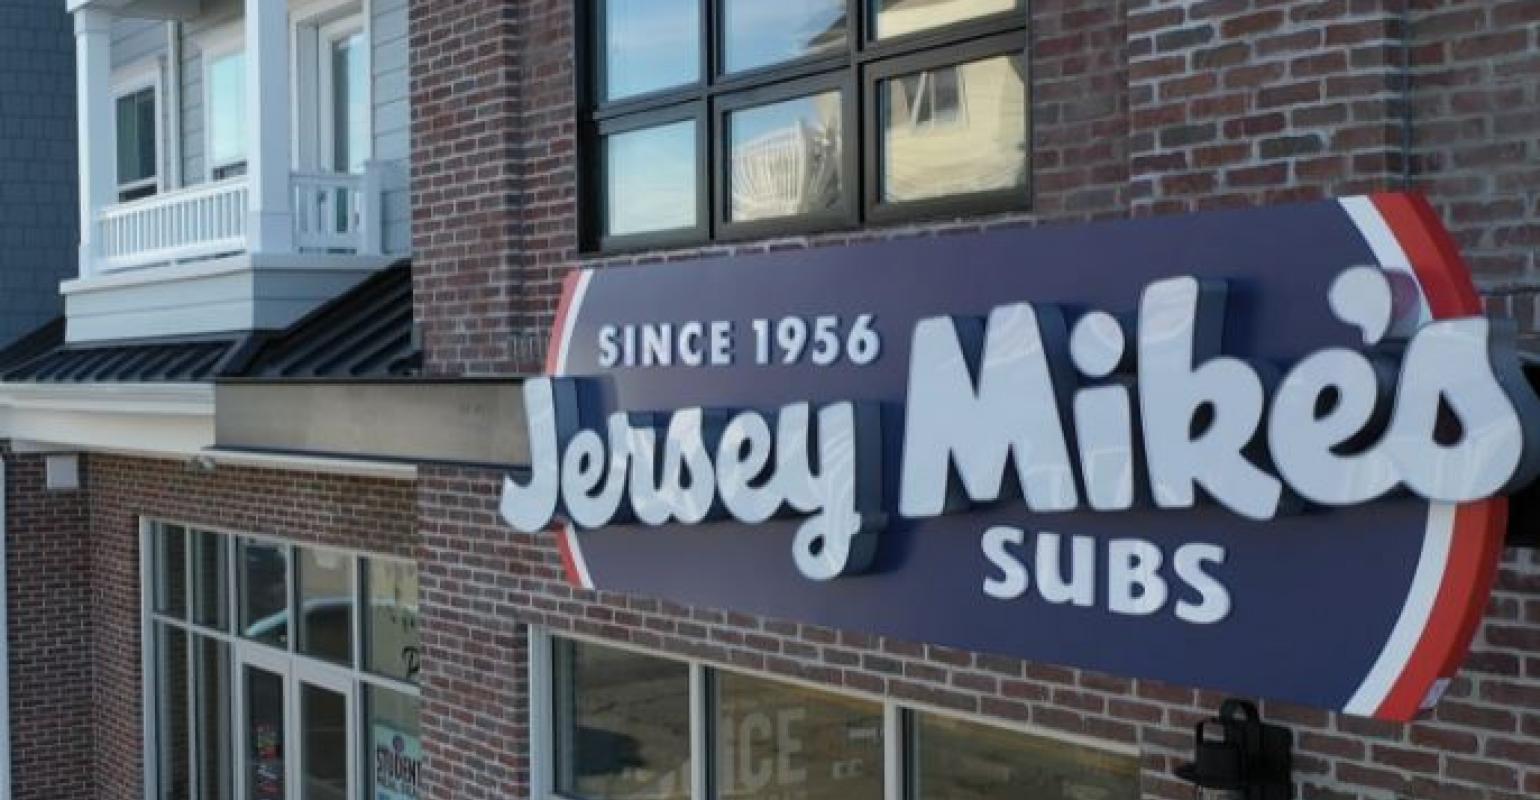 Jersey Mike’s donates ALL sales to the 2022 Special Olympics Nation's